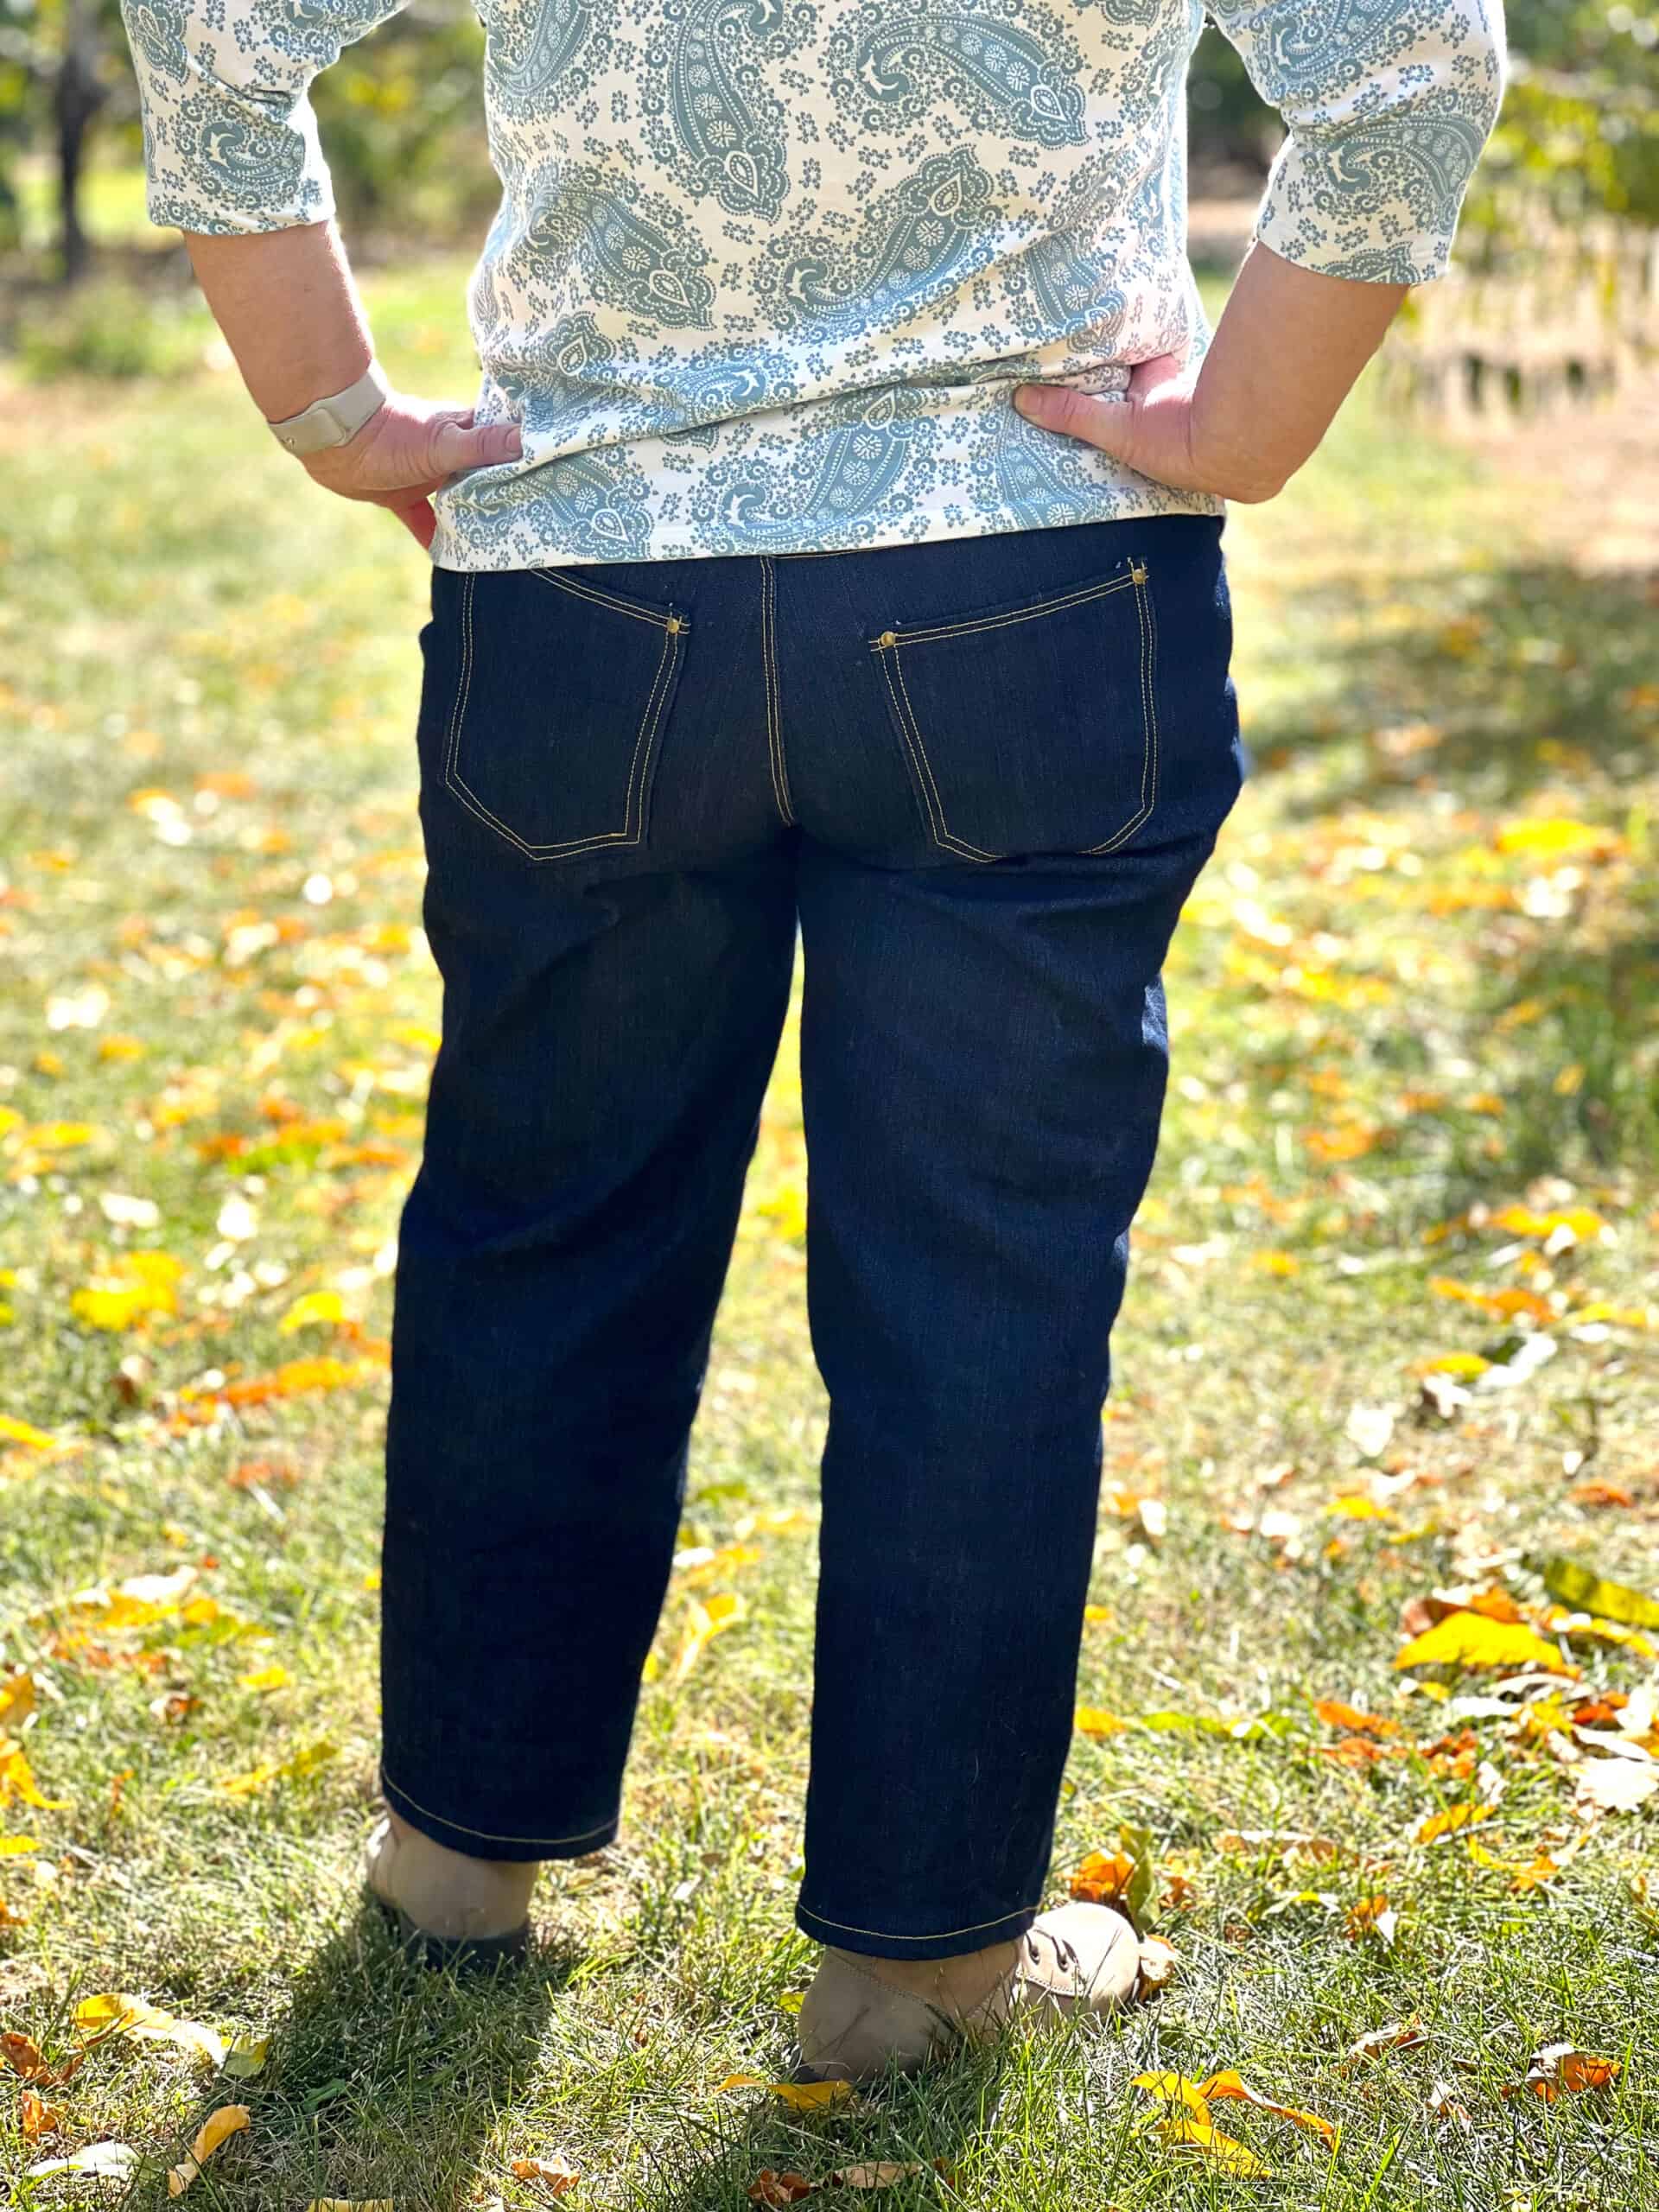 Legato Jeans - Love Notions Sewing Patterns